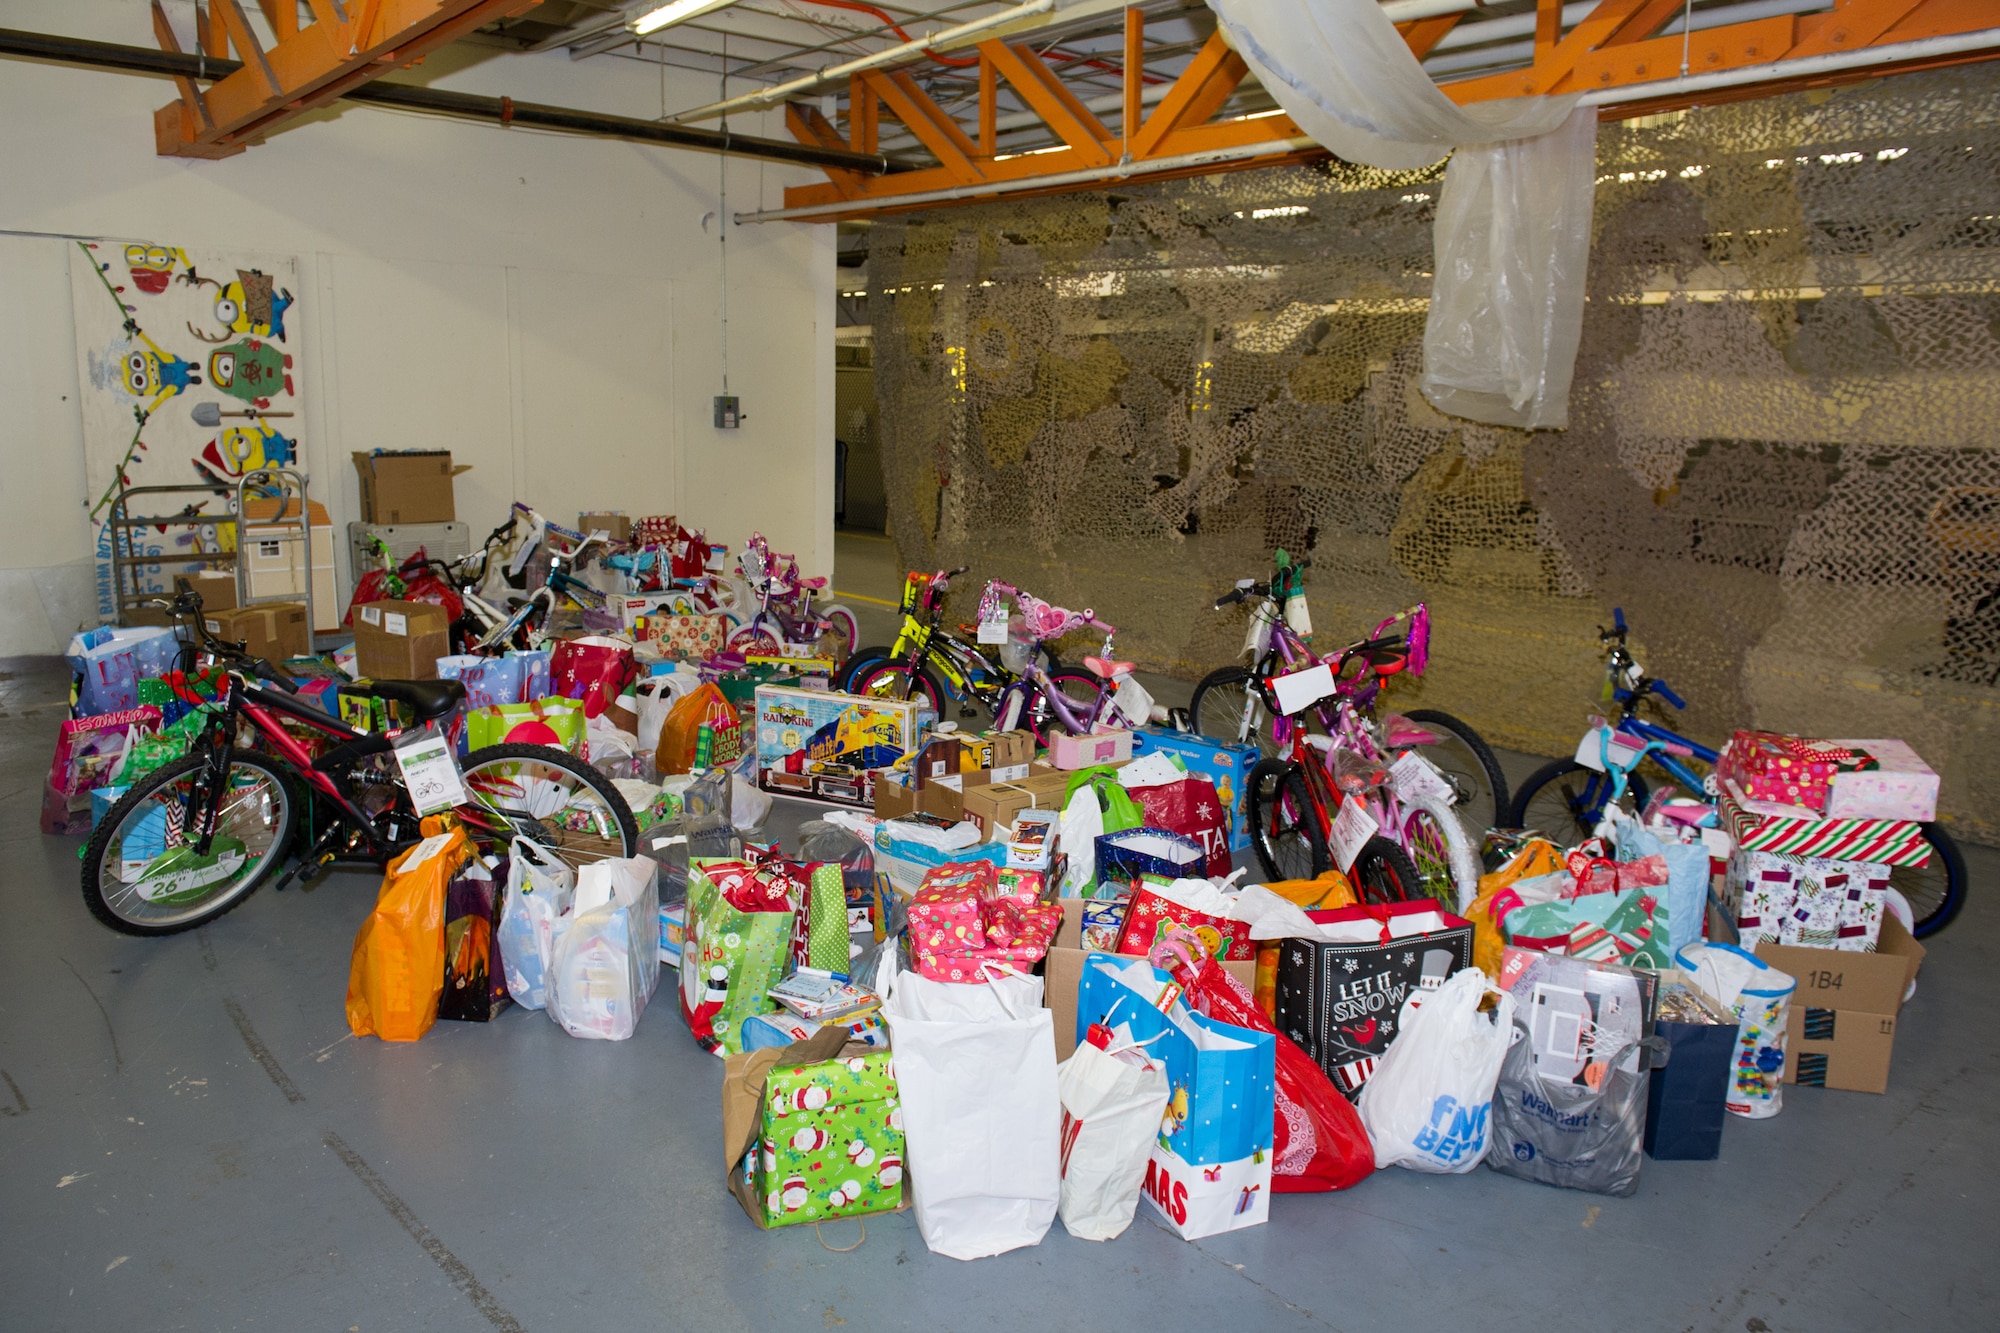 The Patrick AFB and Cape Canaveral AFS First Sergeant's Council collected more than 600 toys, and donated to the Brevard Family Partnership for an annual toy drive in support of children in foster care, Dec. 8, 2015, at Patrick Air Force Base, Fla. Each year, the Brevard Family Partnership relies on numerous organizations and companies to support the event, which made for a total estimate value of $8,000. (U.S. Air Force photo/Benjamin Thacker) (Released) 